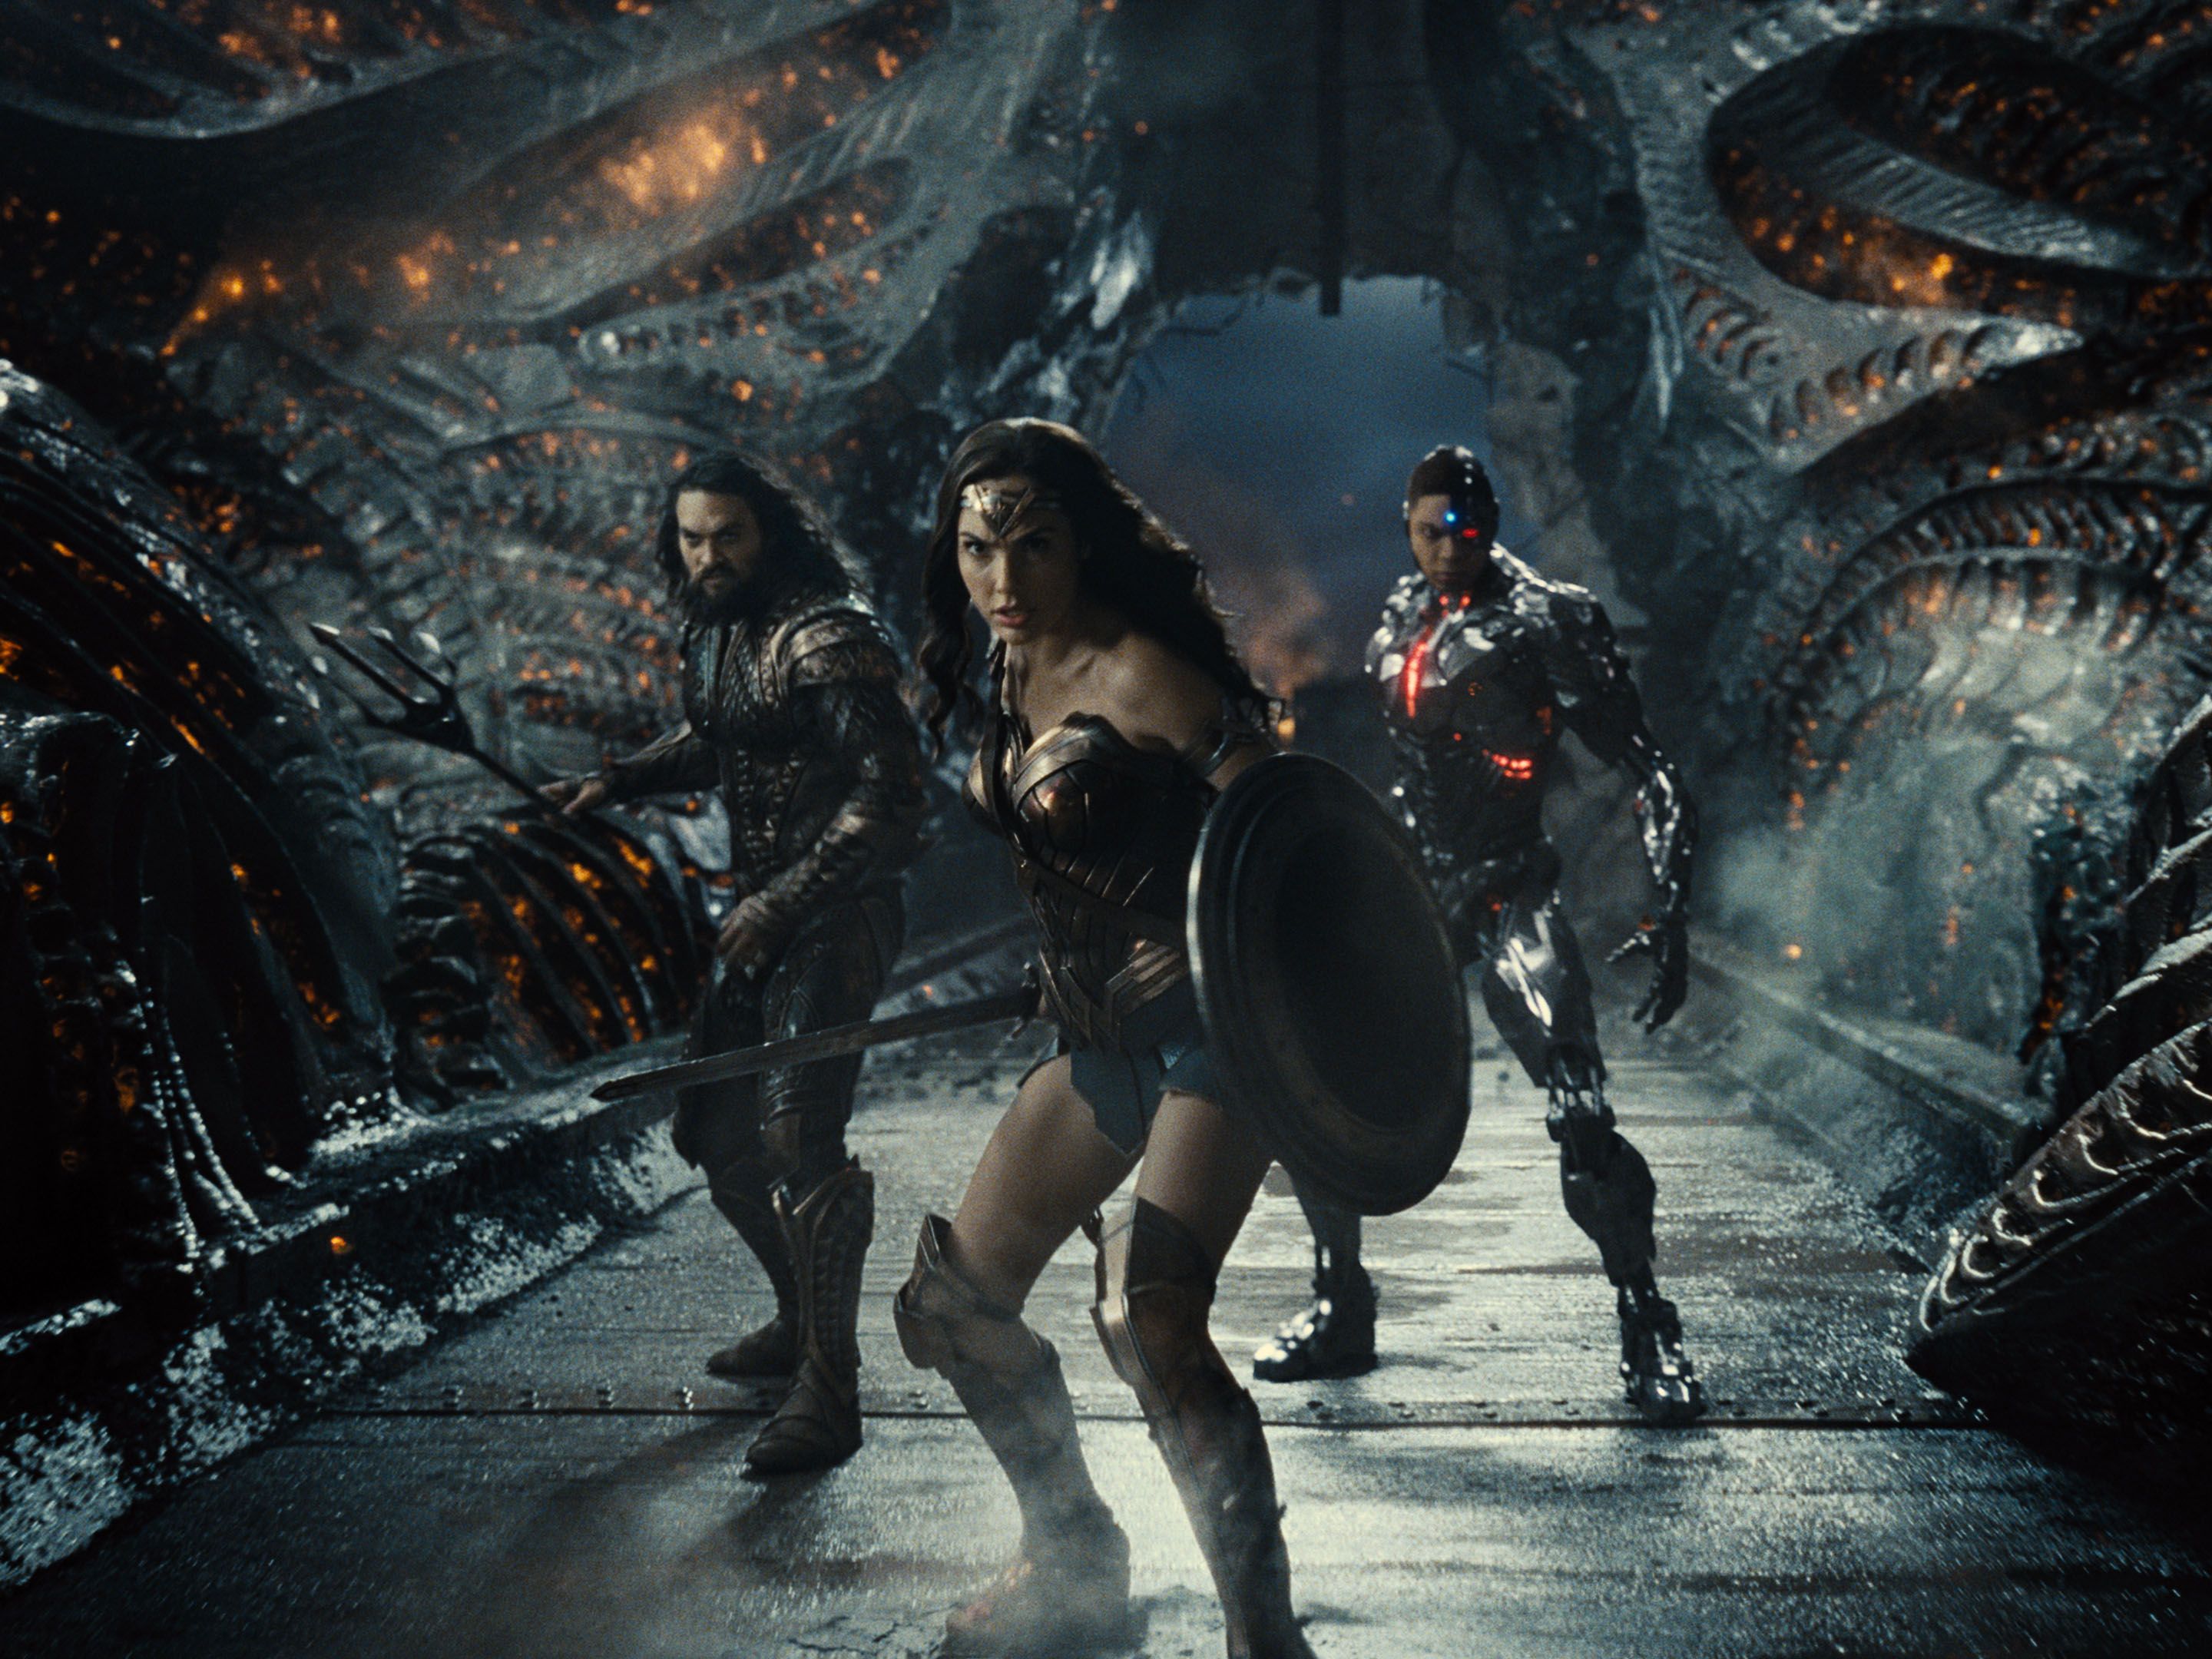 Aquaman, Wonder Woman, and Cyborg in Zack Snyder's Justice League